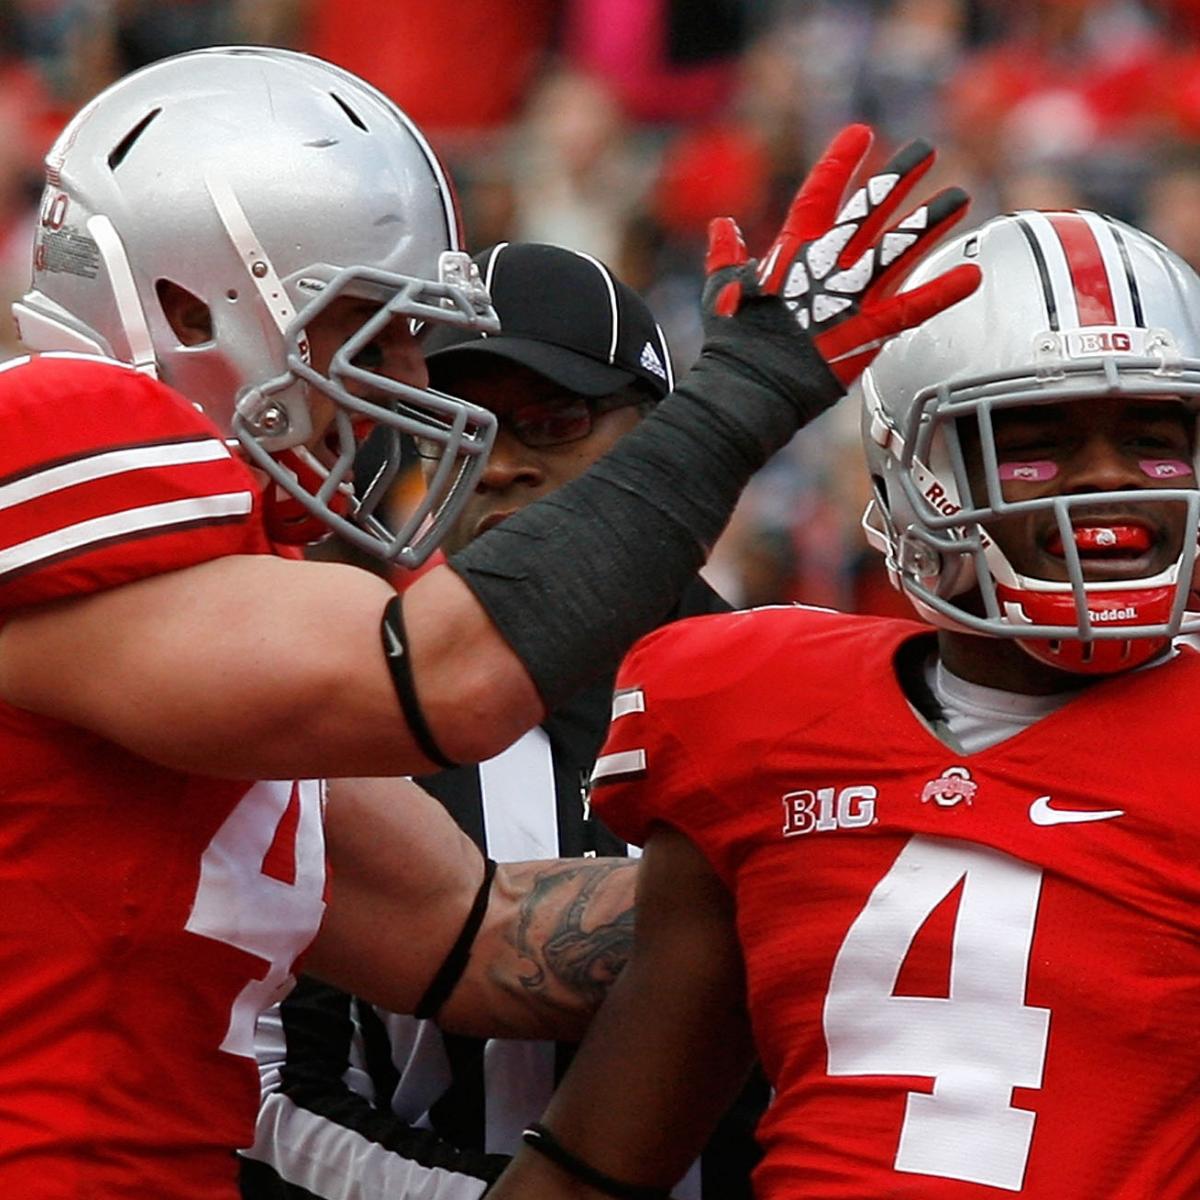 Ohio State Football 10 Things We Learned from the Buckeyes' Win vs